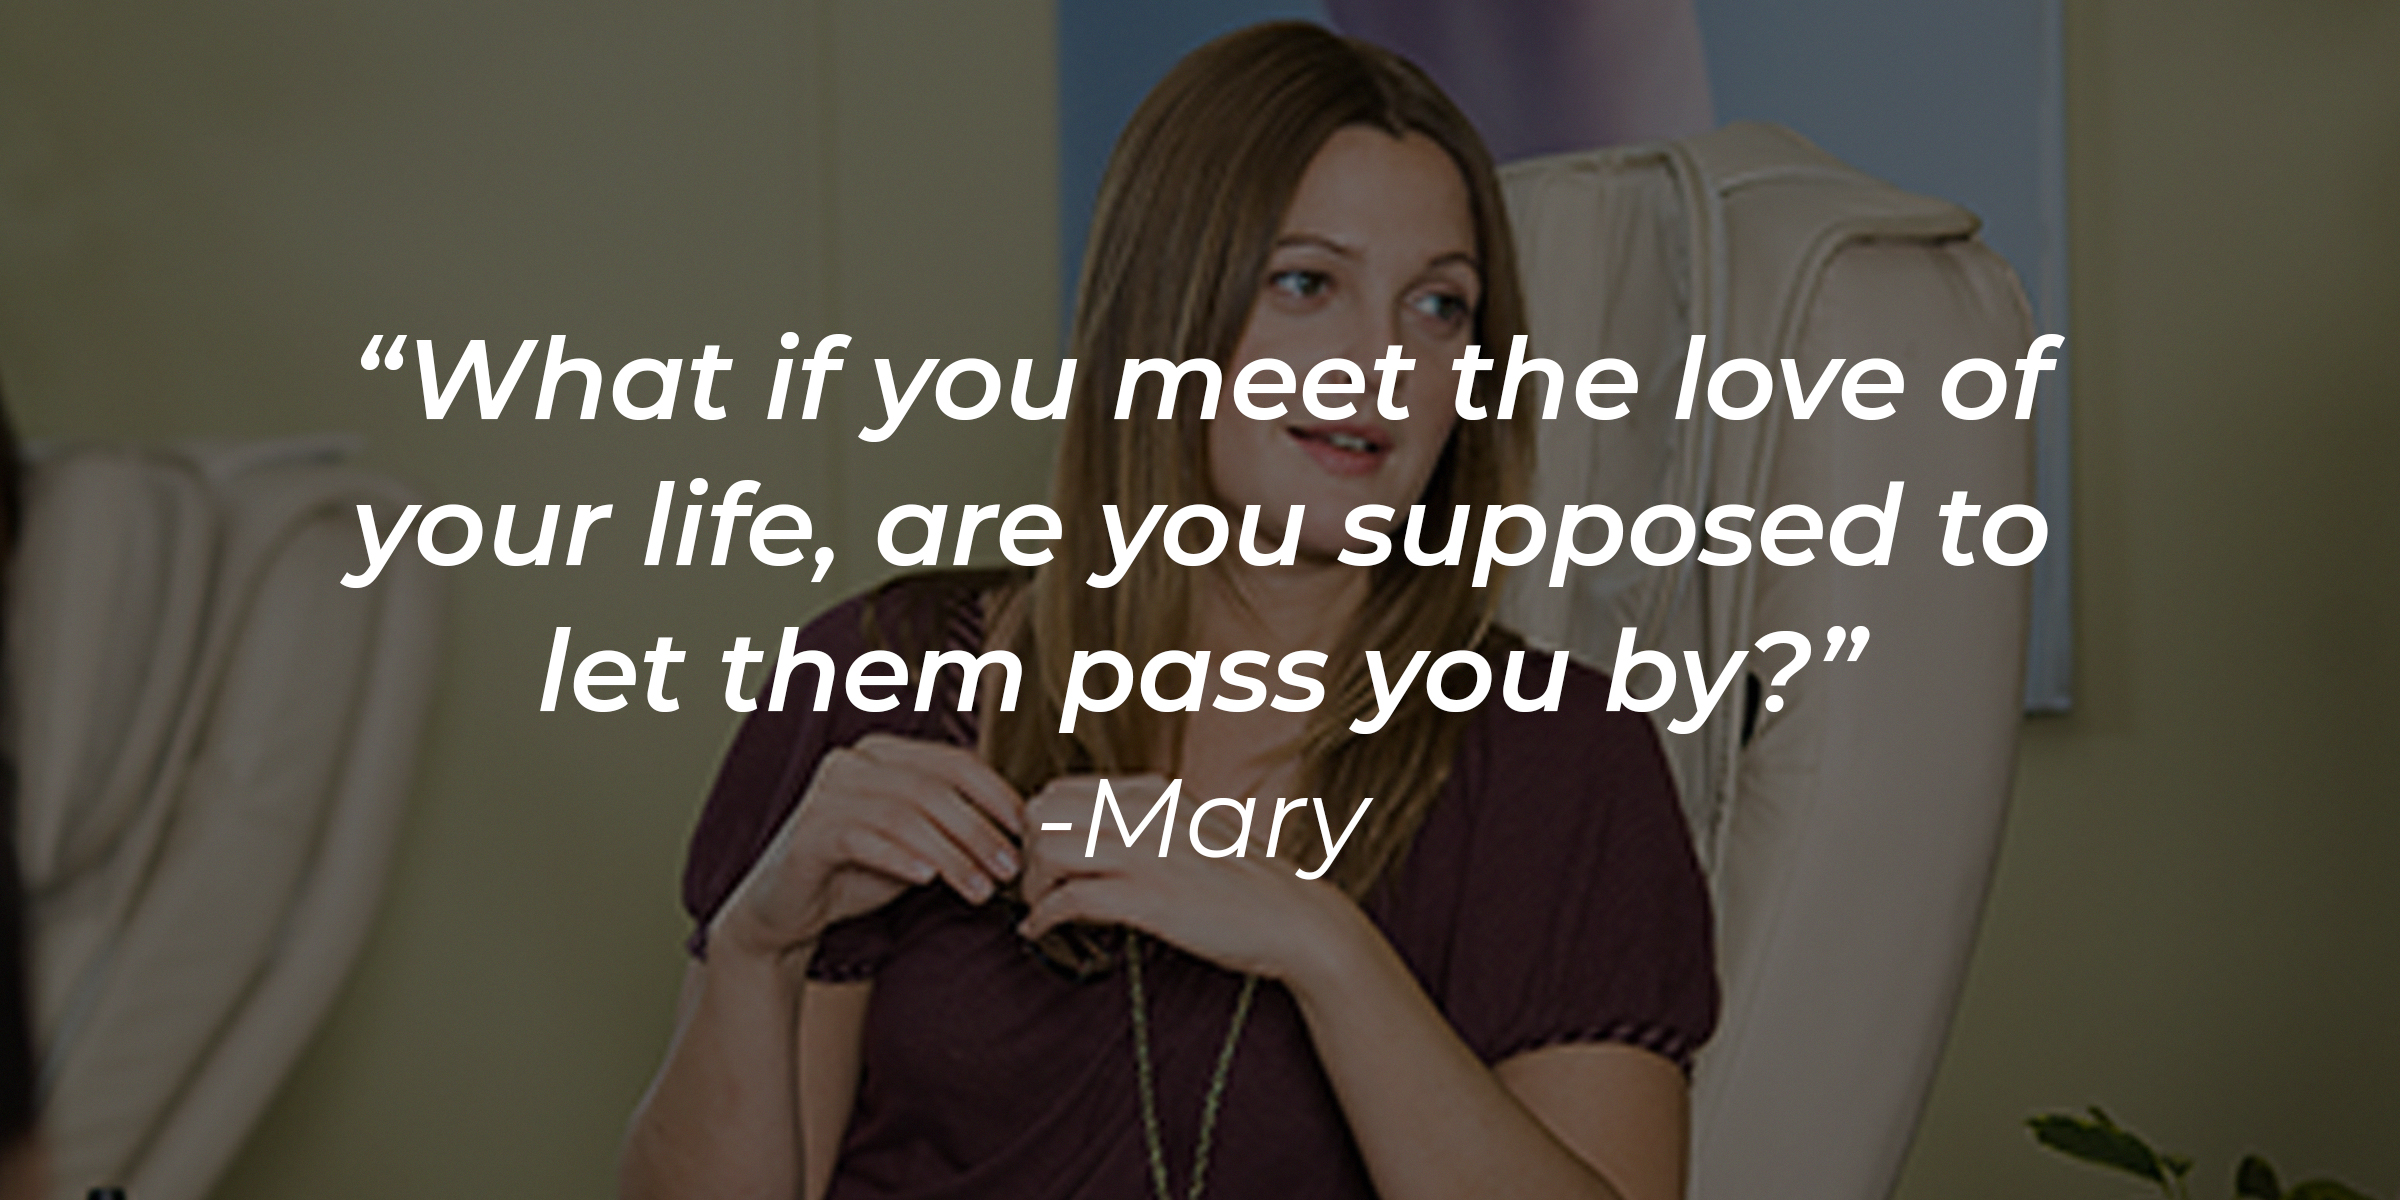 Mary's quote: "What if you meet the love of your life, are you supposed to let them pass you by?" | Source: Facebook/hesjustnotthatintoyou